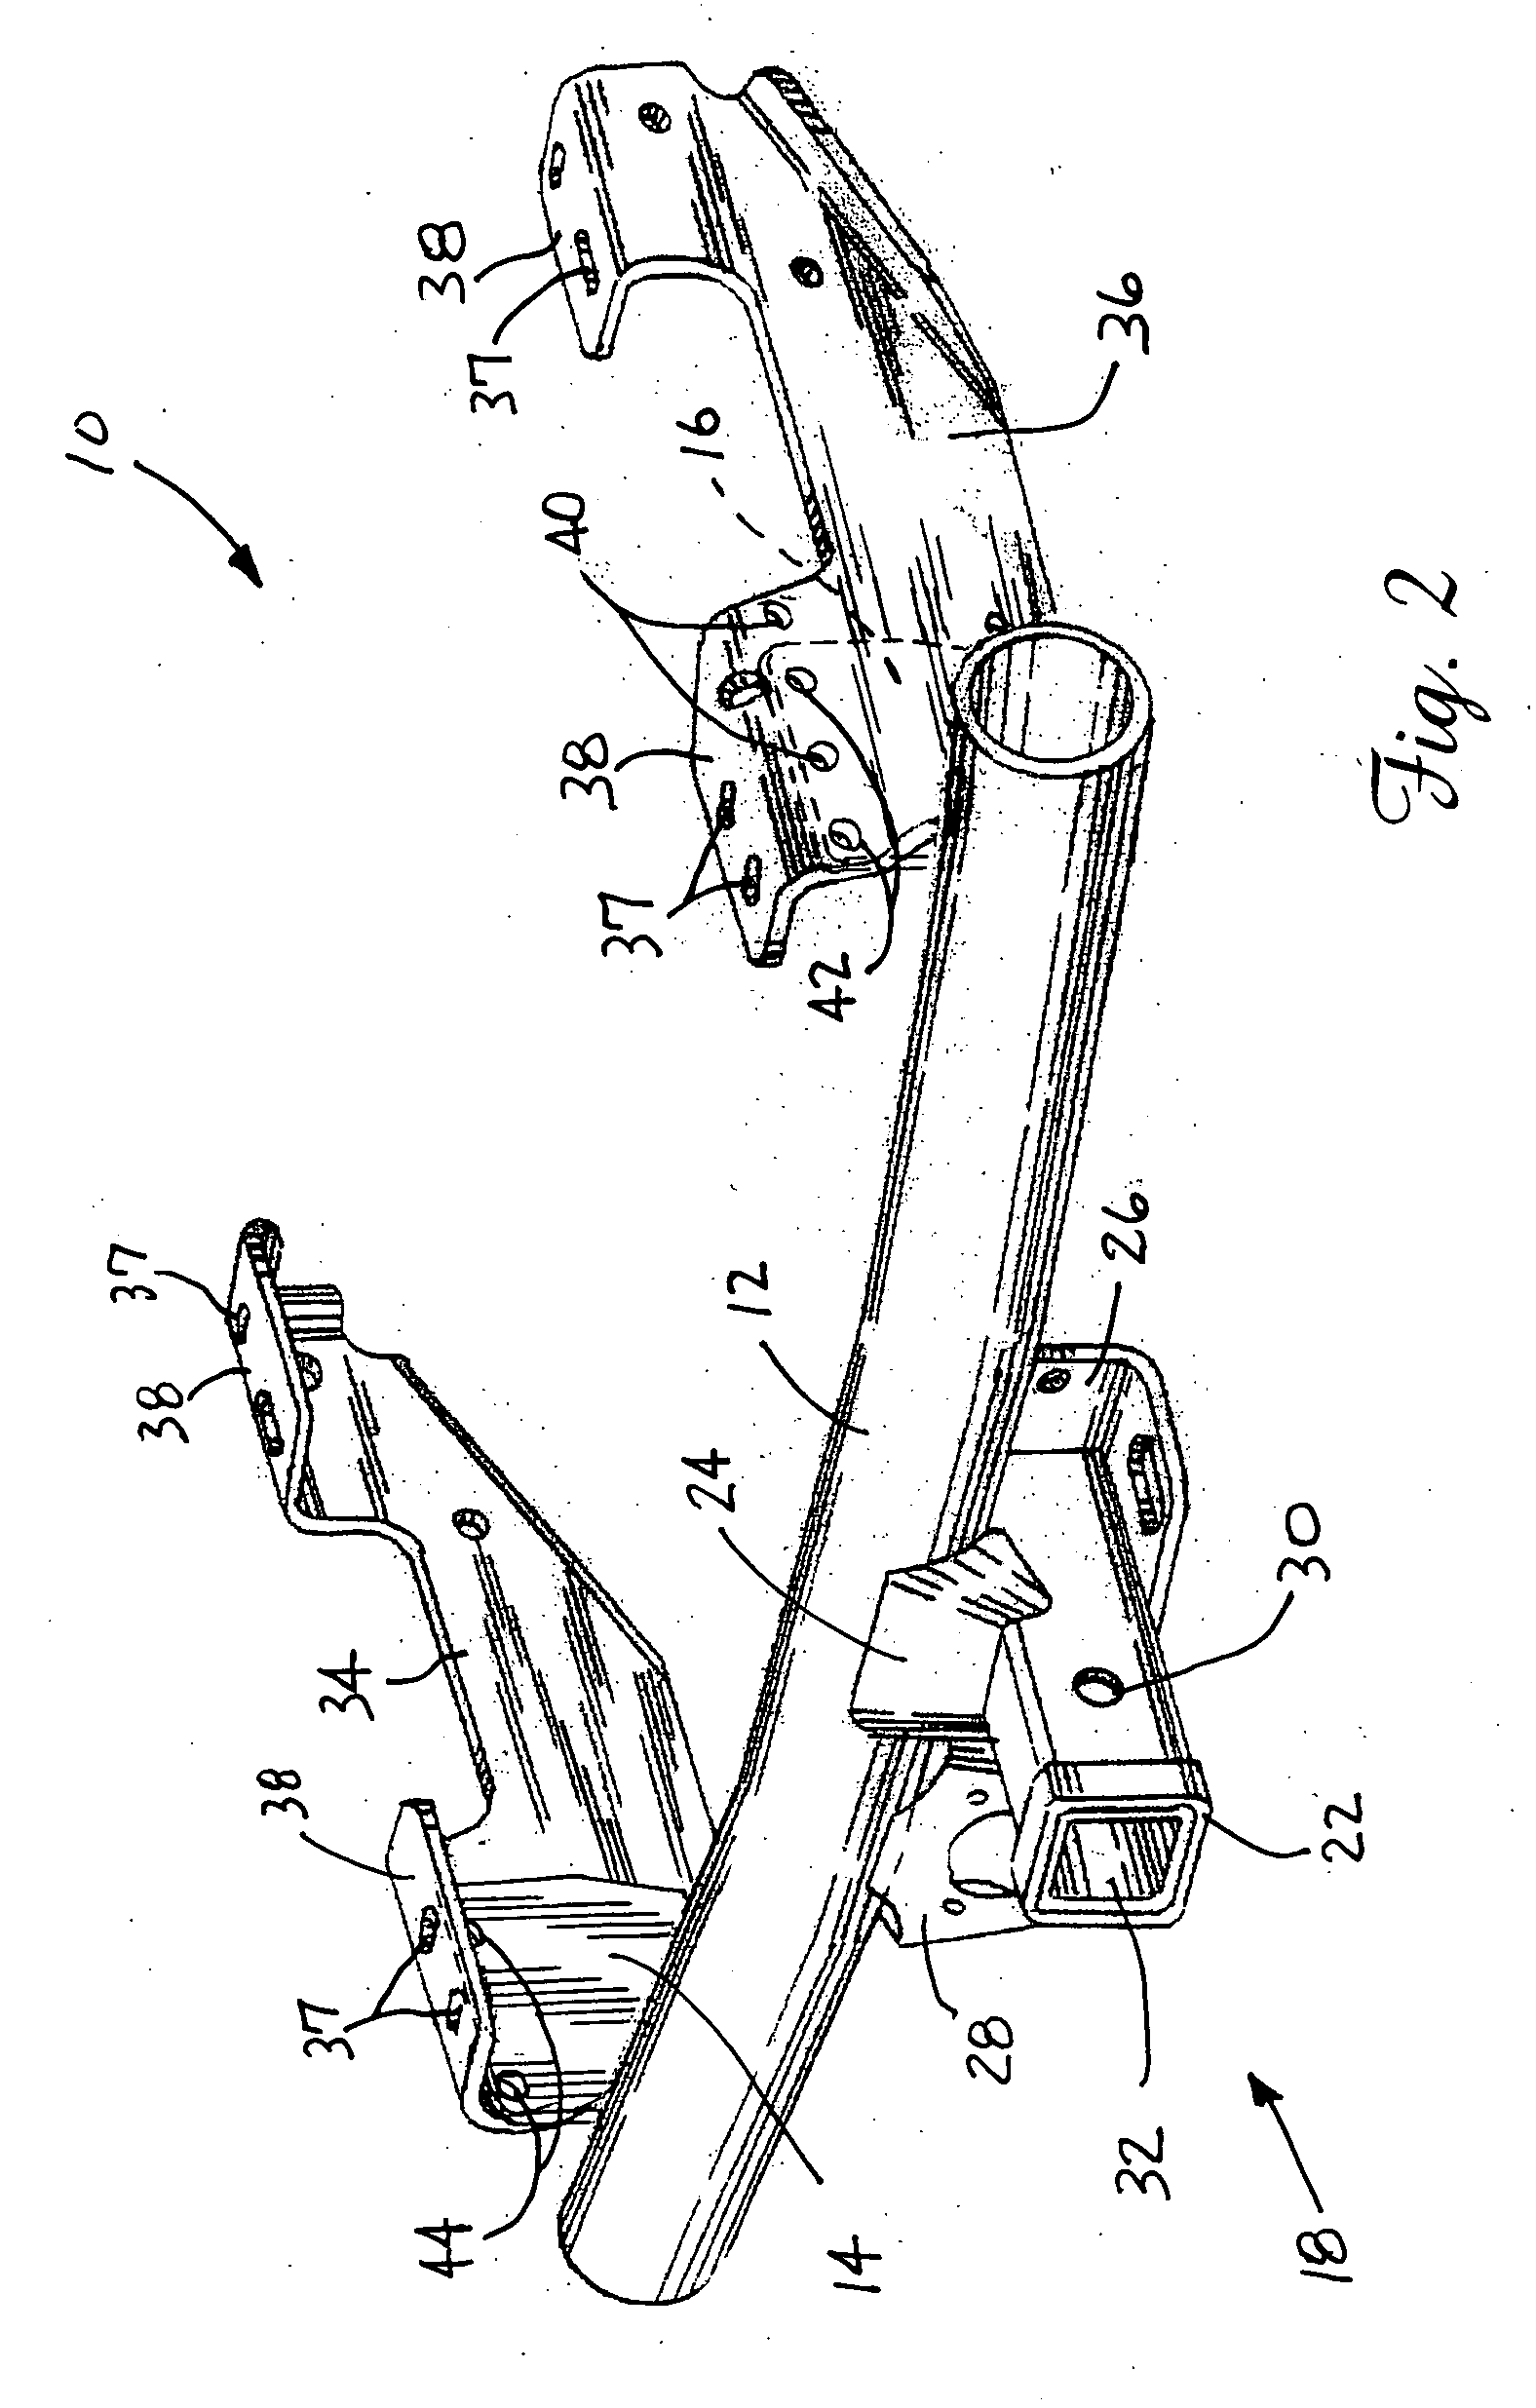 Multi-fit hitch assembly with selectively positionable mounting flanges